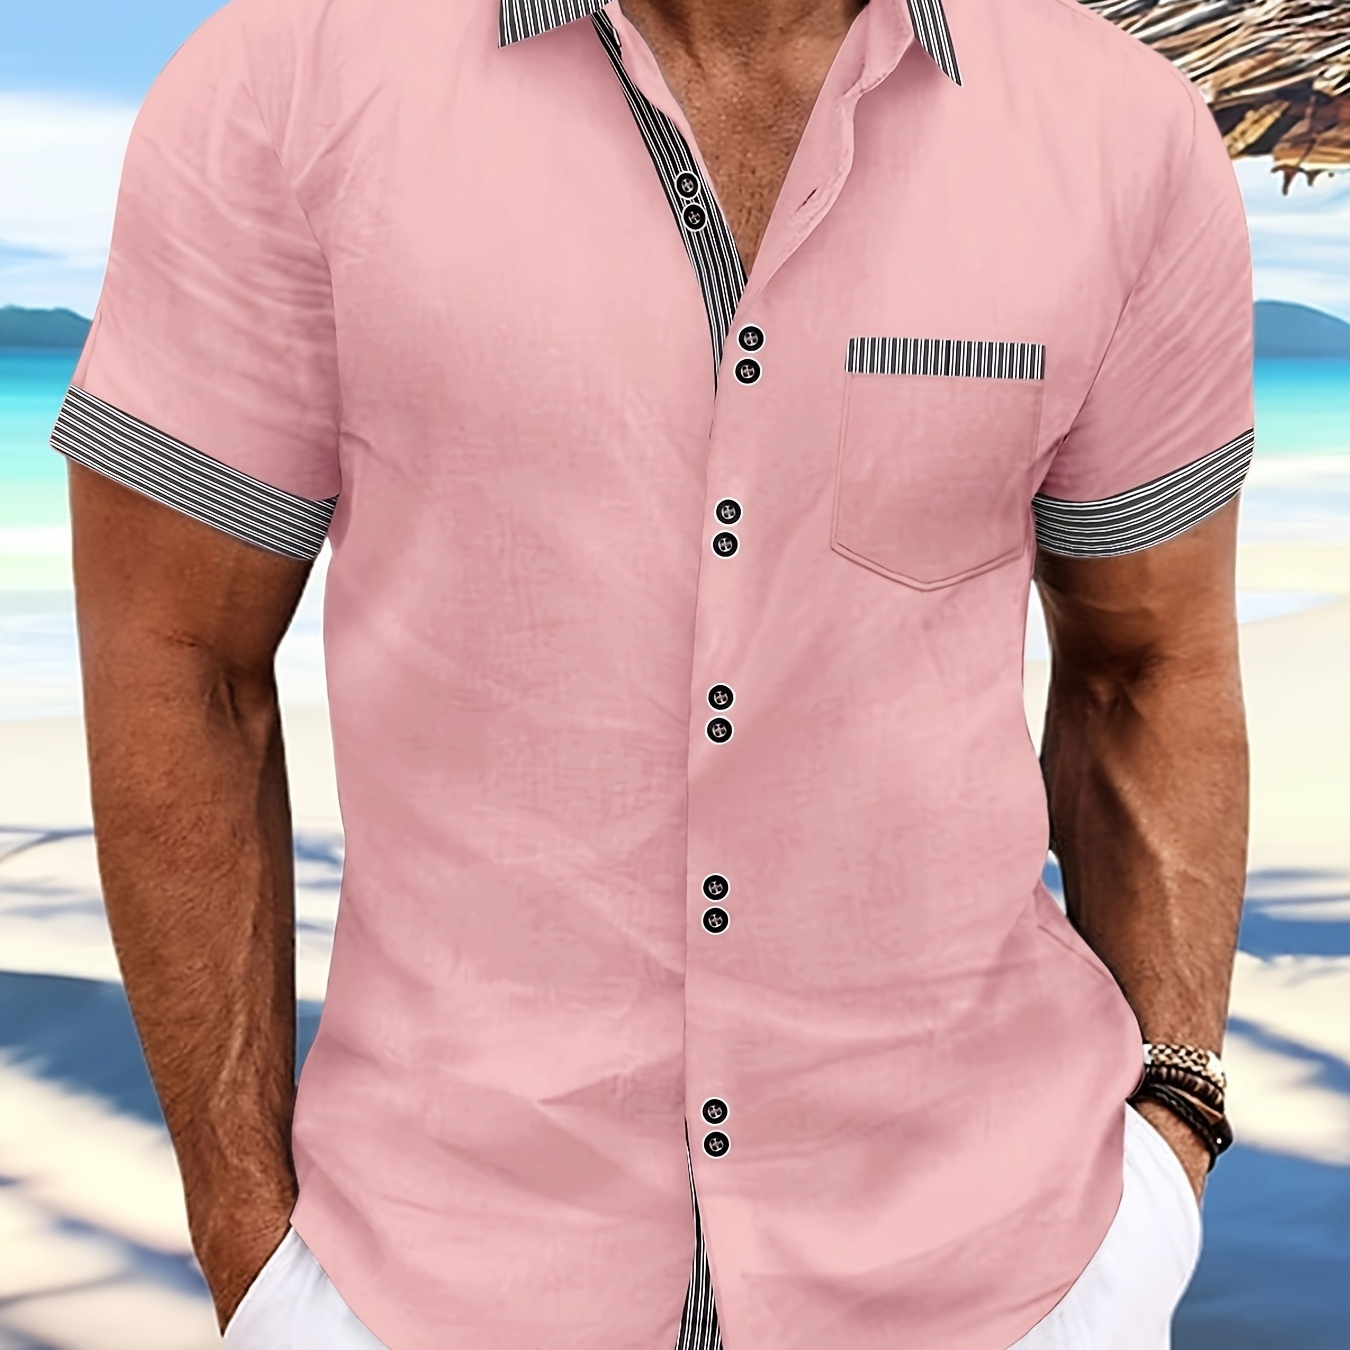 

Men's Short Sleeve Button Up Lapel Shirt With Breasted Pocket And Contrast Color Pieces, Casual And Chic Tops Suitable For Summer Daily And Holiday Wear